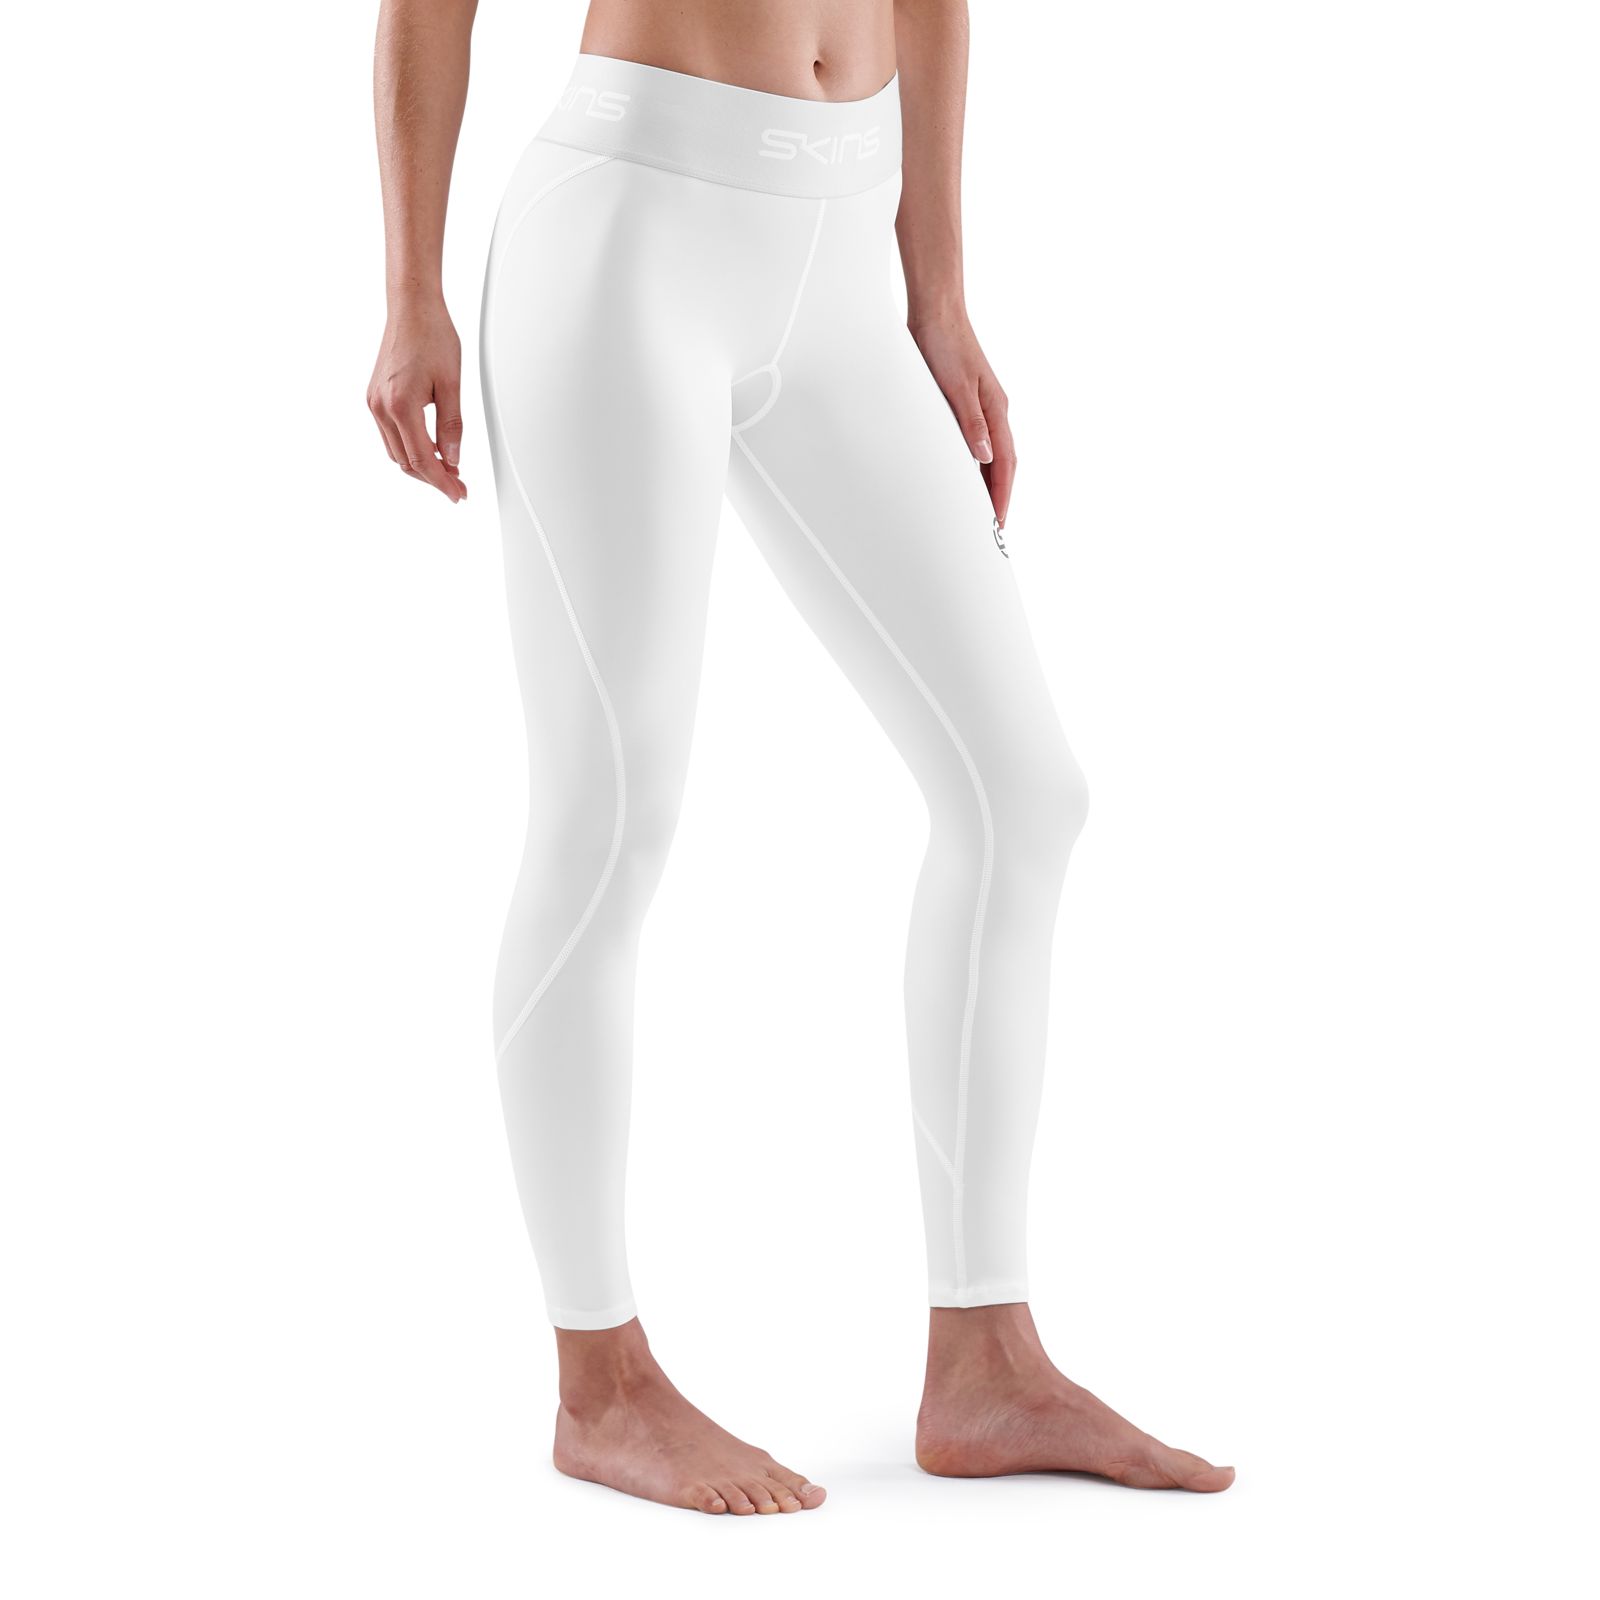 skins compression Series-1 Women's Half Tights – RUNNERS SPORTS